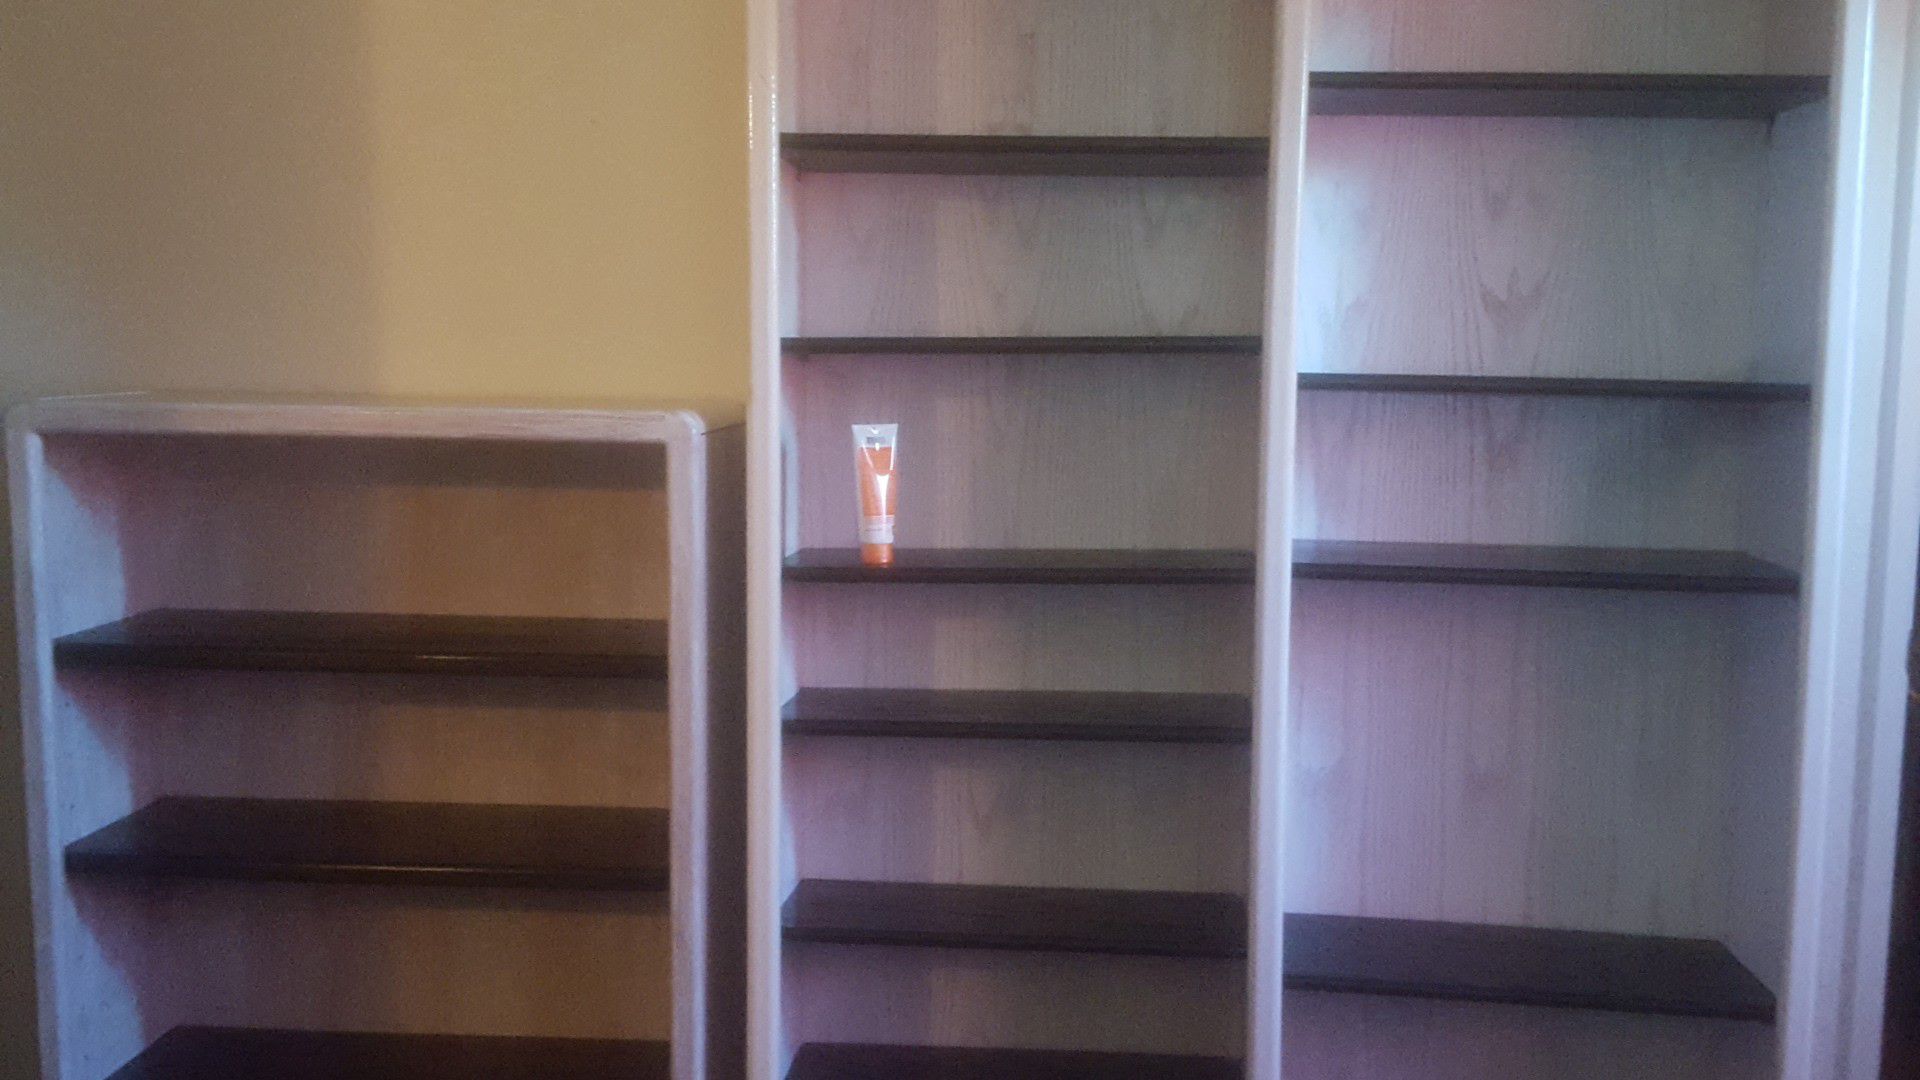 oak wood stained bookshelves tall one 6 ft by 47 in short one 4 ft Buy 32in shelves are adjustable asking $180 for both